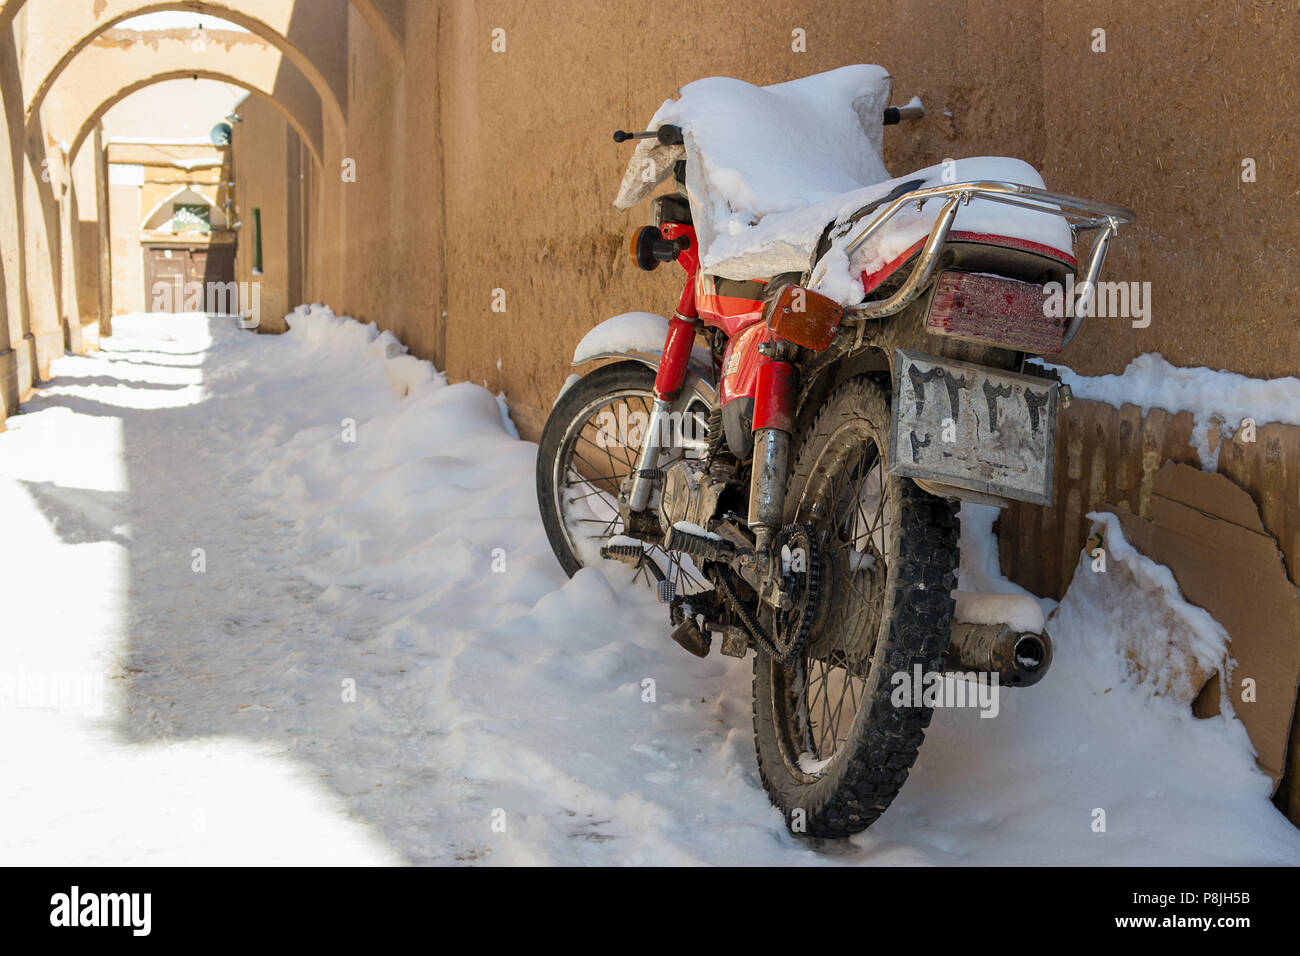 A snow covered motorbike rests against a clay and straw rendered wall in a snow filled back passage in down town Yazd, Iran. Stock Photo